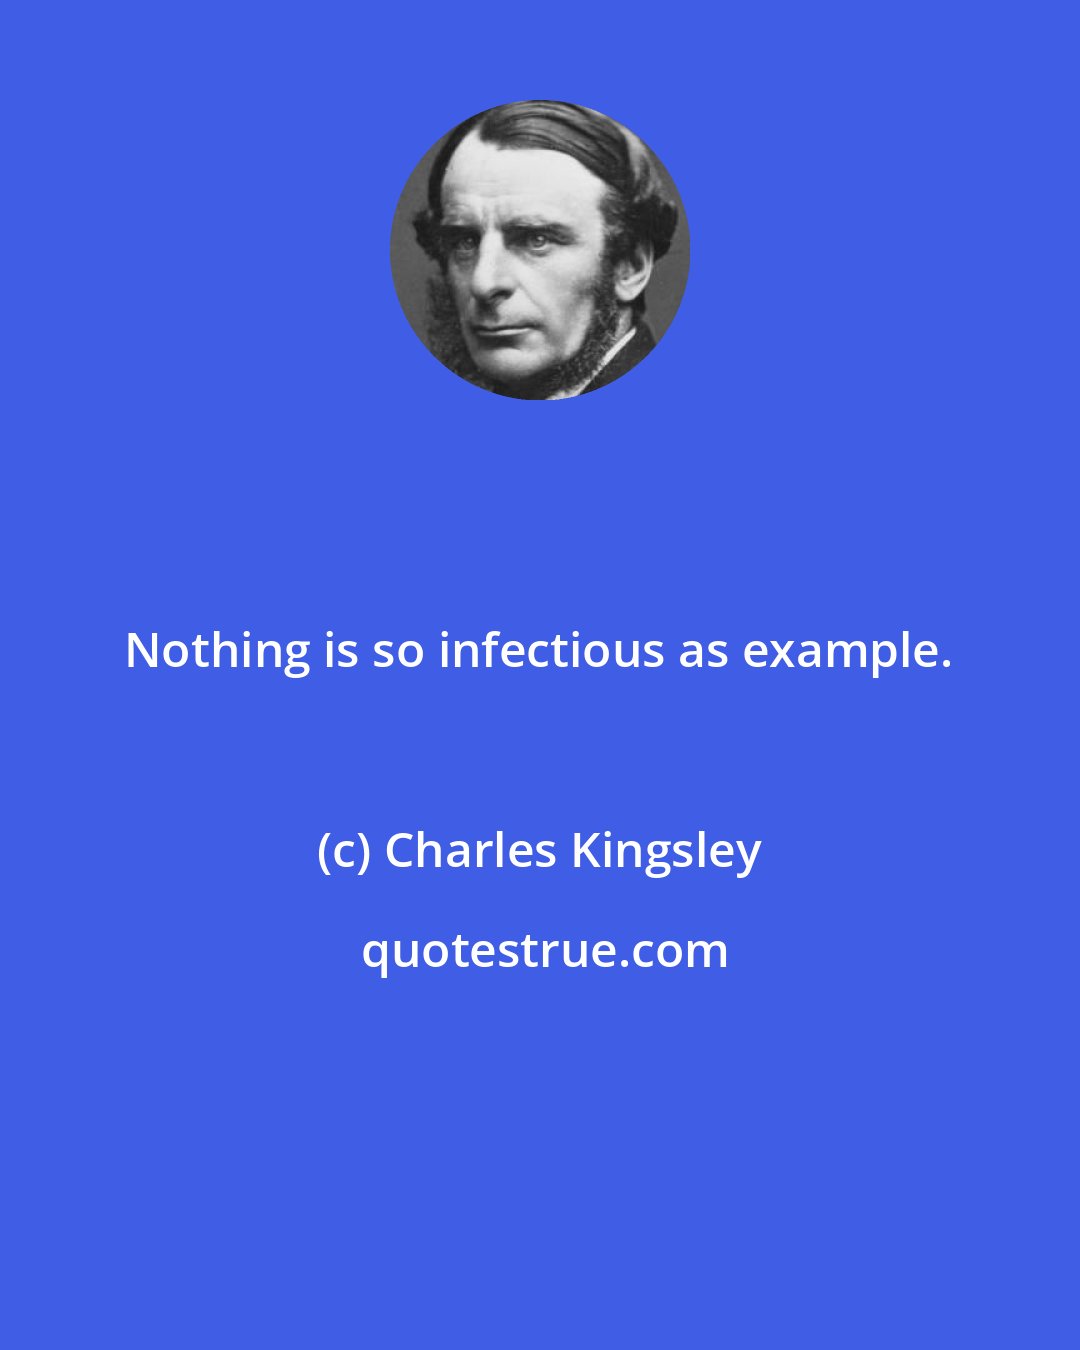 Charles Kingsley: Nothing is so infectious as example.